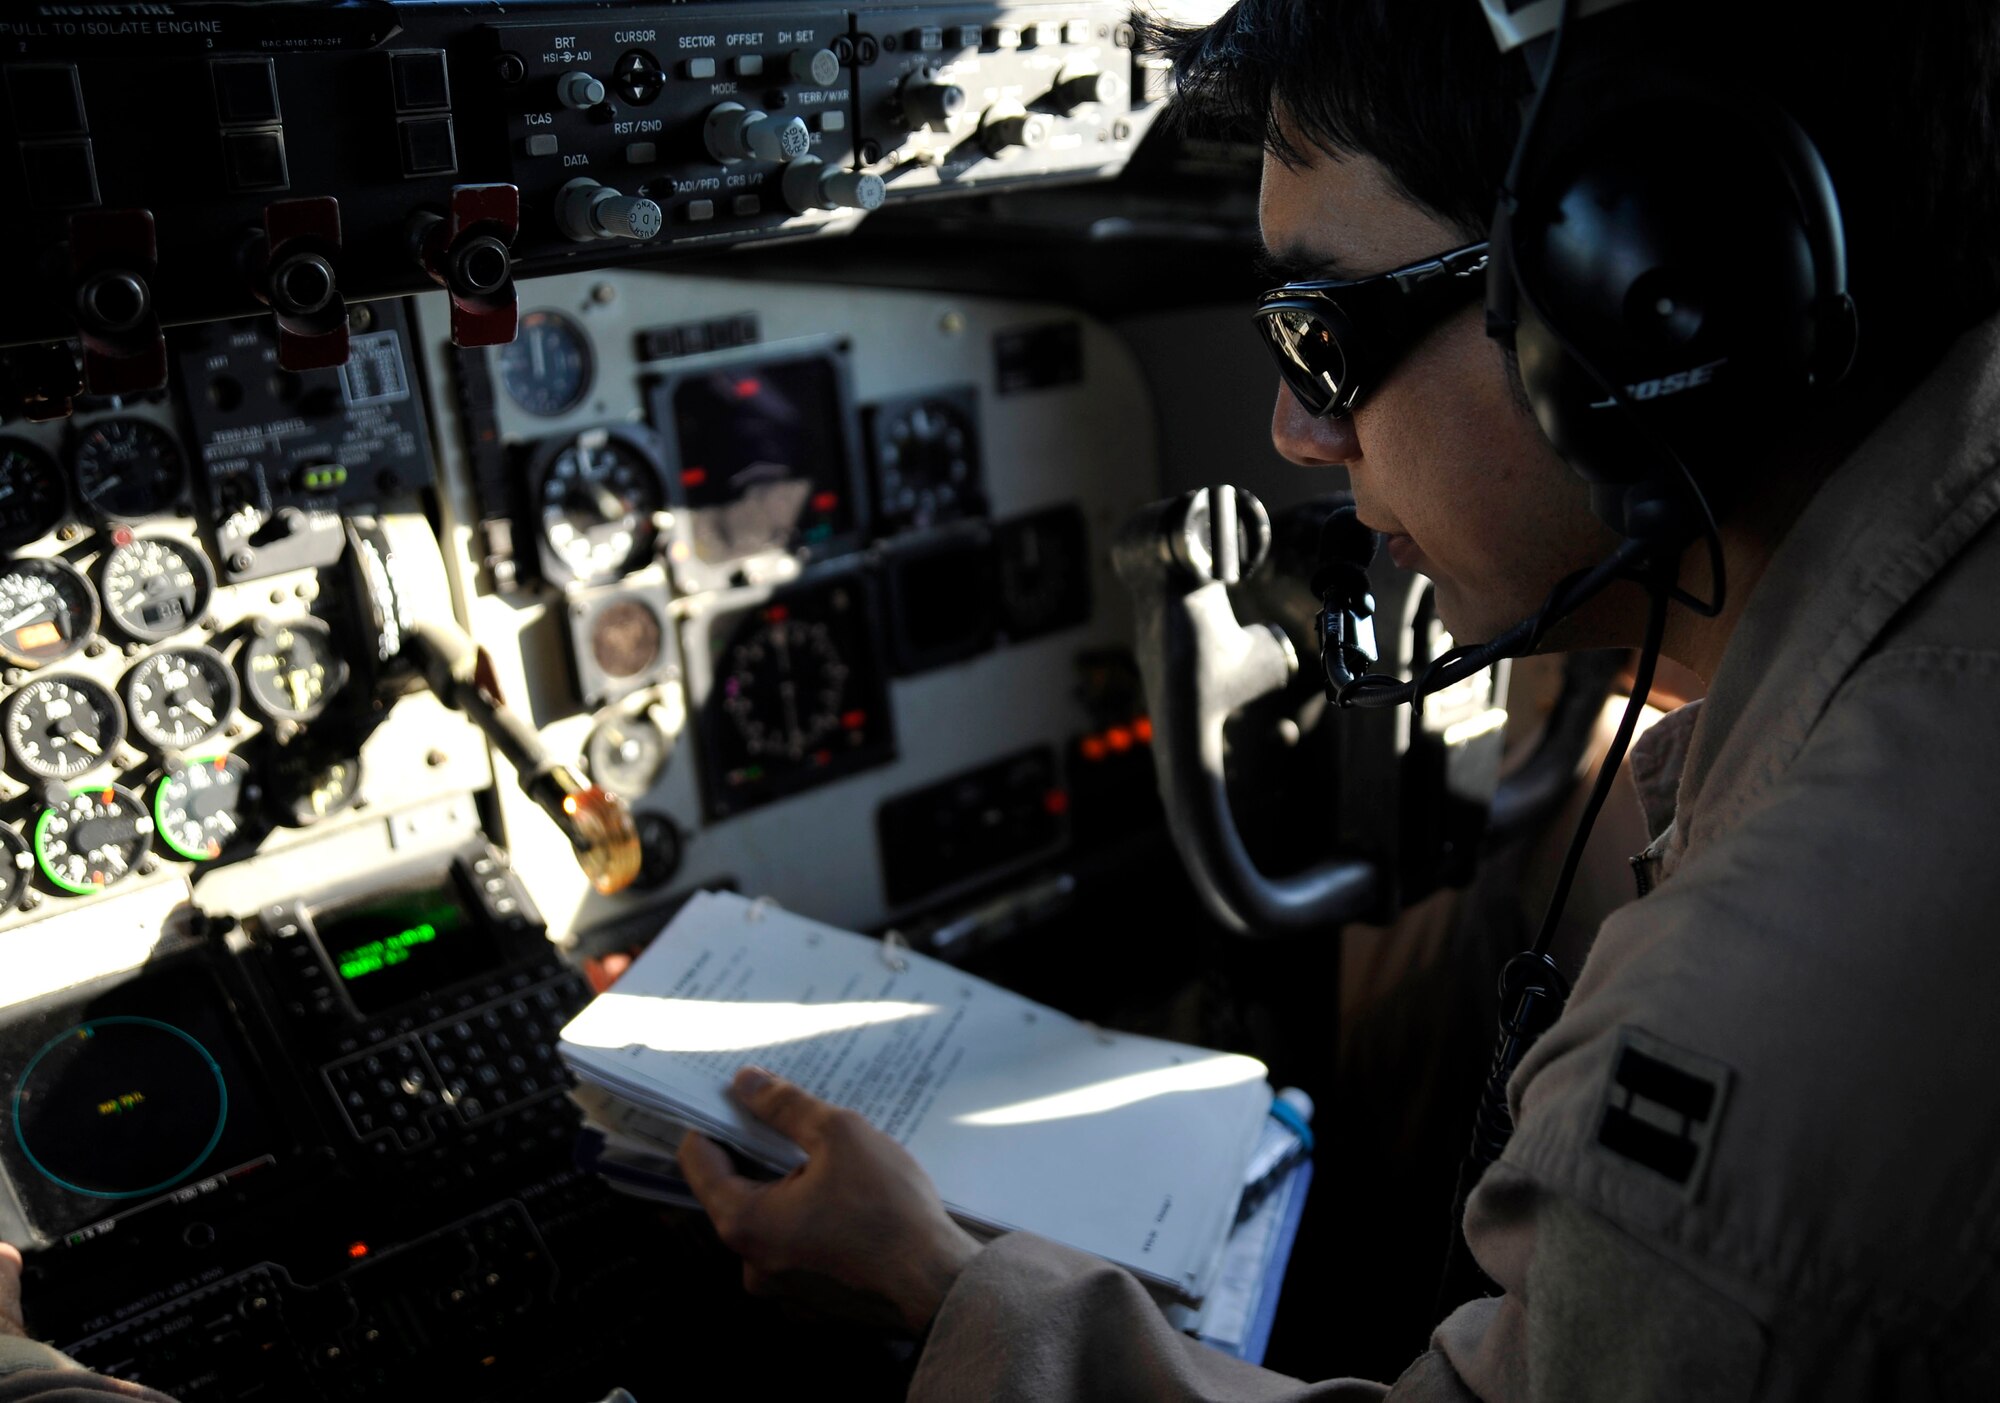 U.S. Air Force Capt.Erik Gorza, 340th Expeditionary Air Refueling Squadron KC-135 Stratotanker co-pilot, completes his checklist before starting engines, Jan.15, 2010, in Southwest Asia.  The KC-135 will be refueling aircraft over Afgahanistan to support Operation Enduring Freedom. (U.S. Air Force photo/ SSgt Angelita Lawrence/released)
